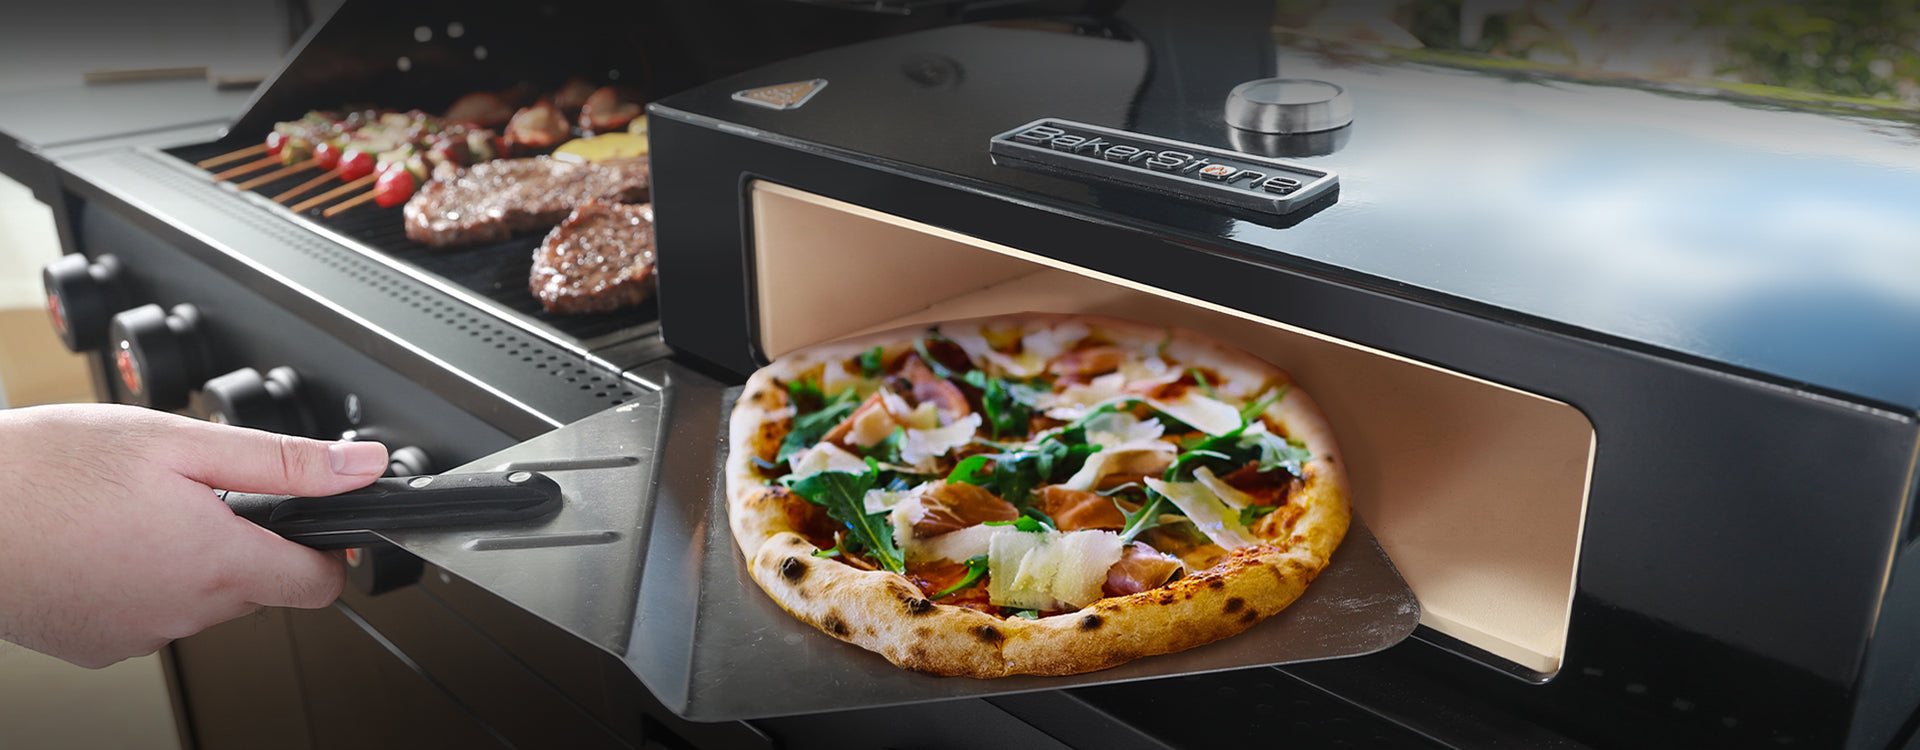 BakerStone Pizza Ovens  Portable & Outdoor Pizza Ovens